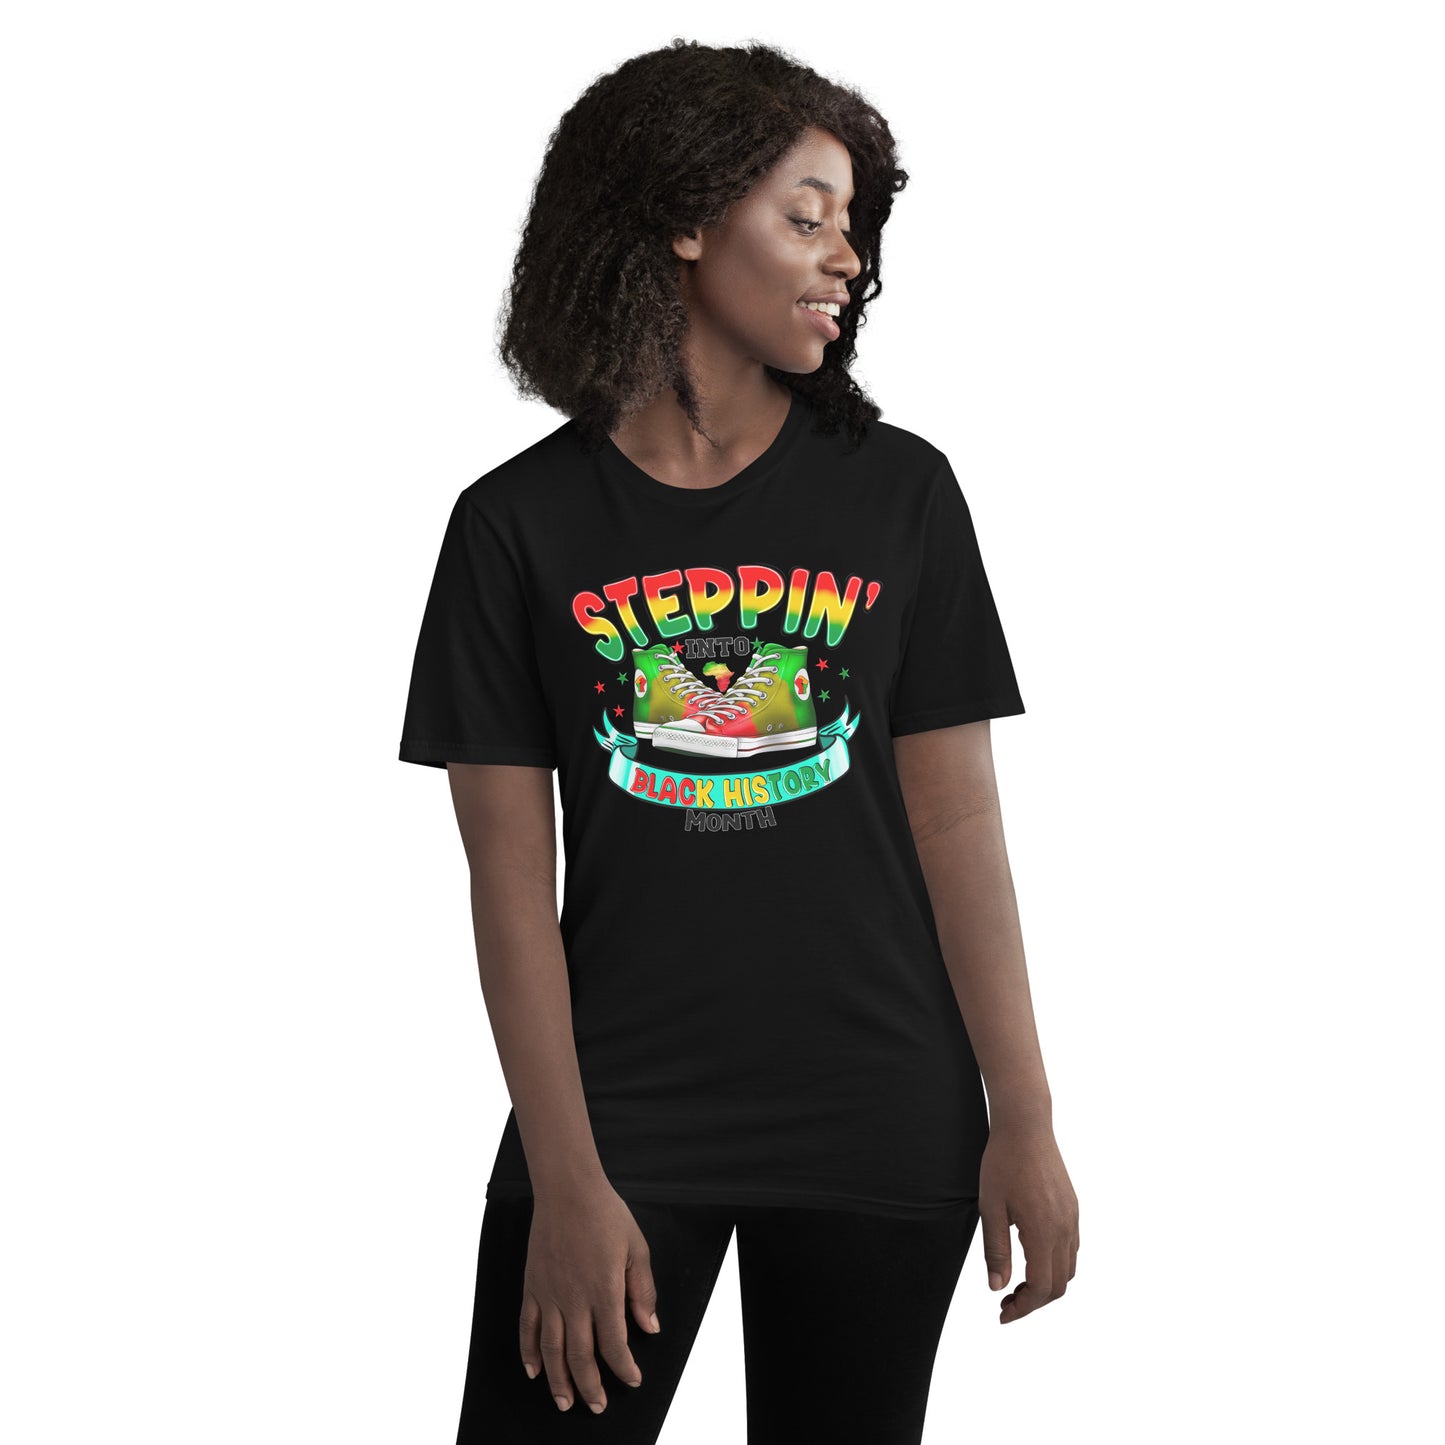 Short-Sleeve T-Shirt - Steppin Into Black History Month